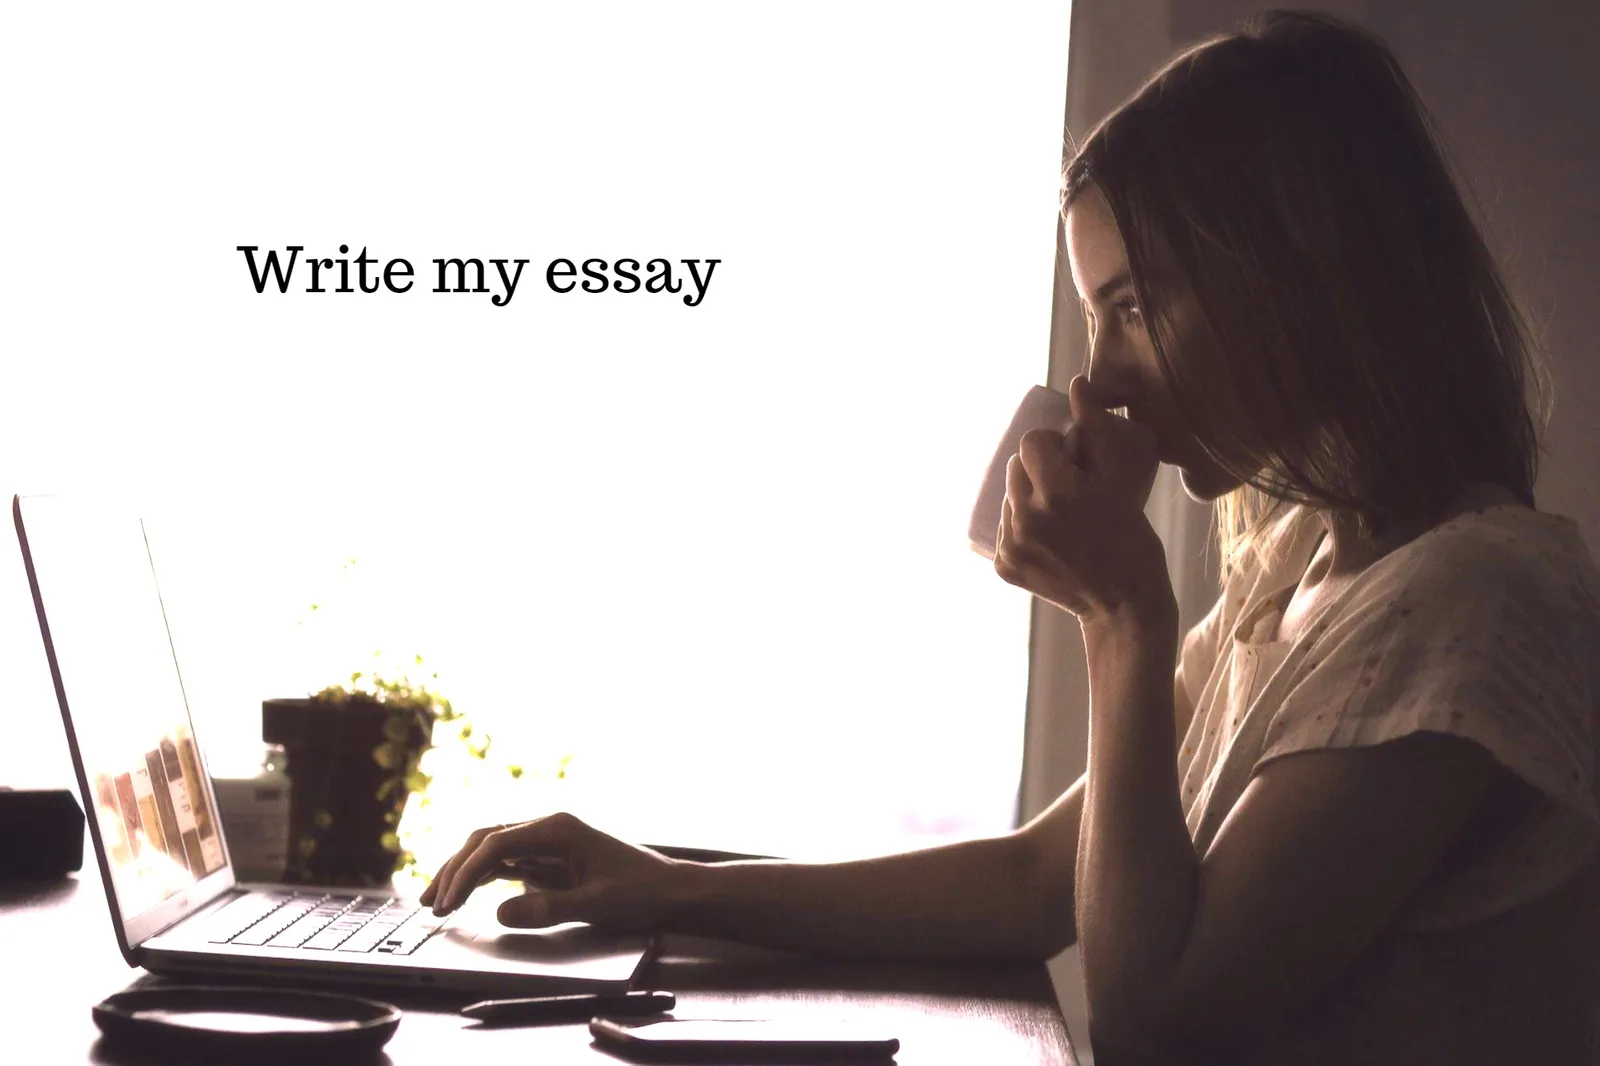 buy an essay online now For Sale – How Much Is Yours Worth?